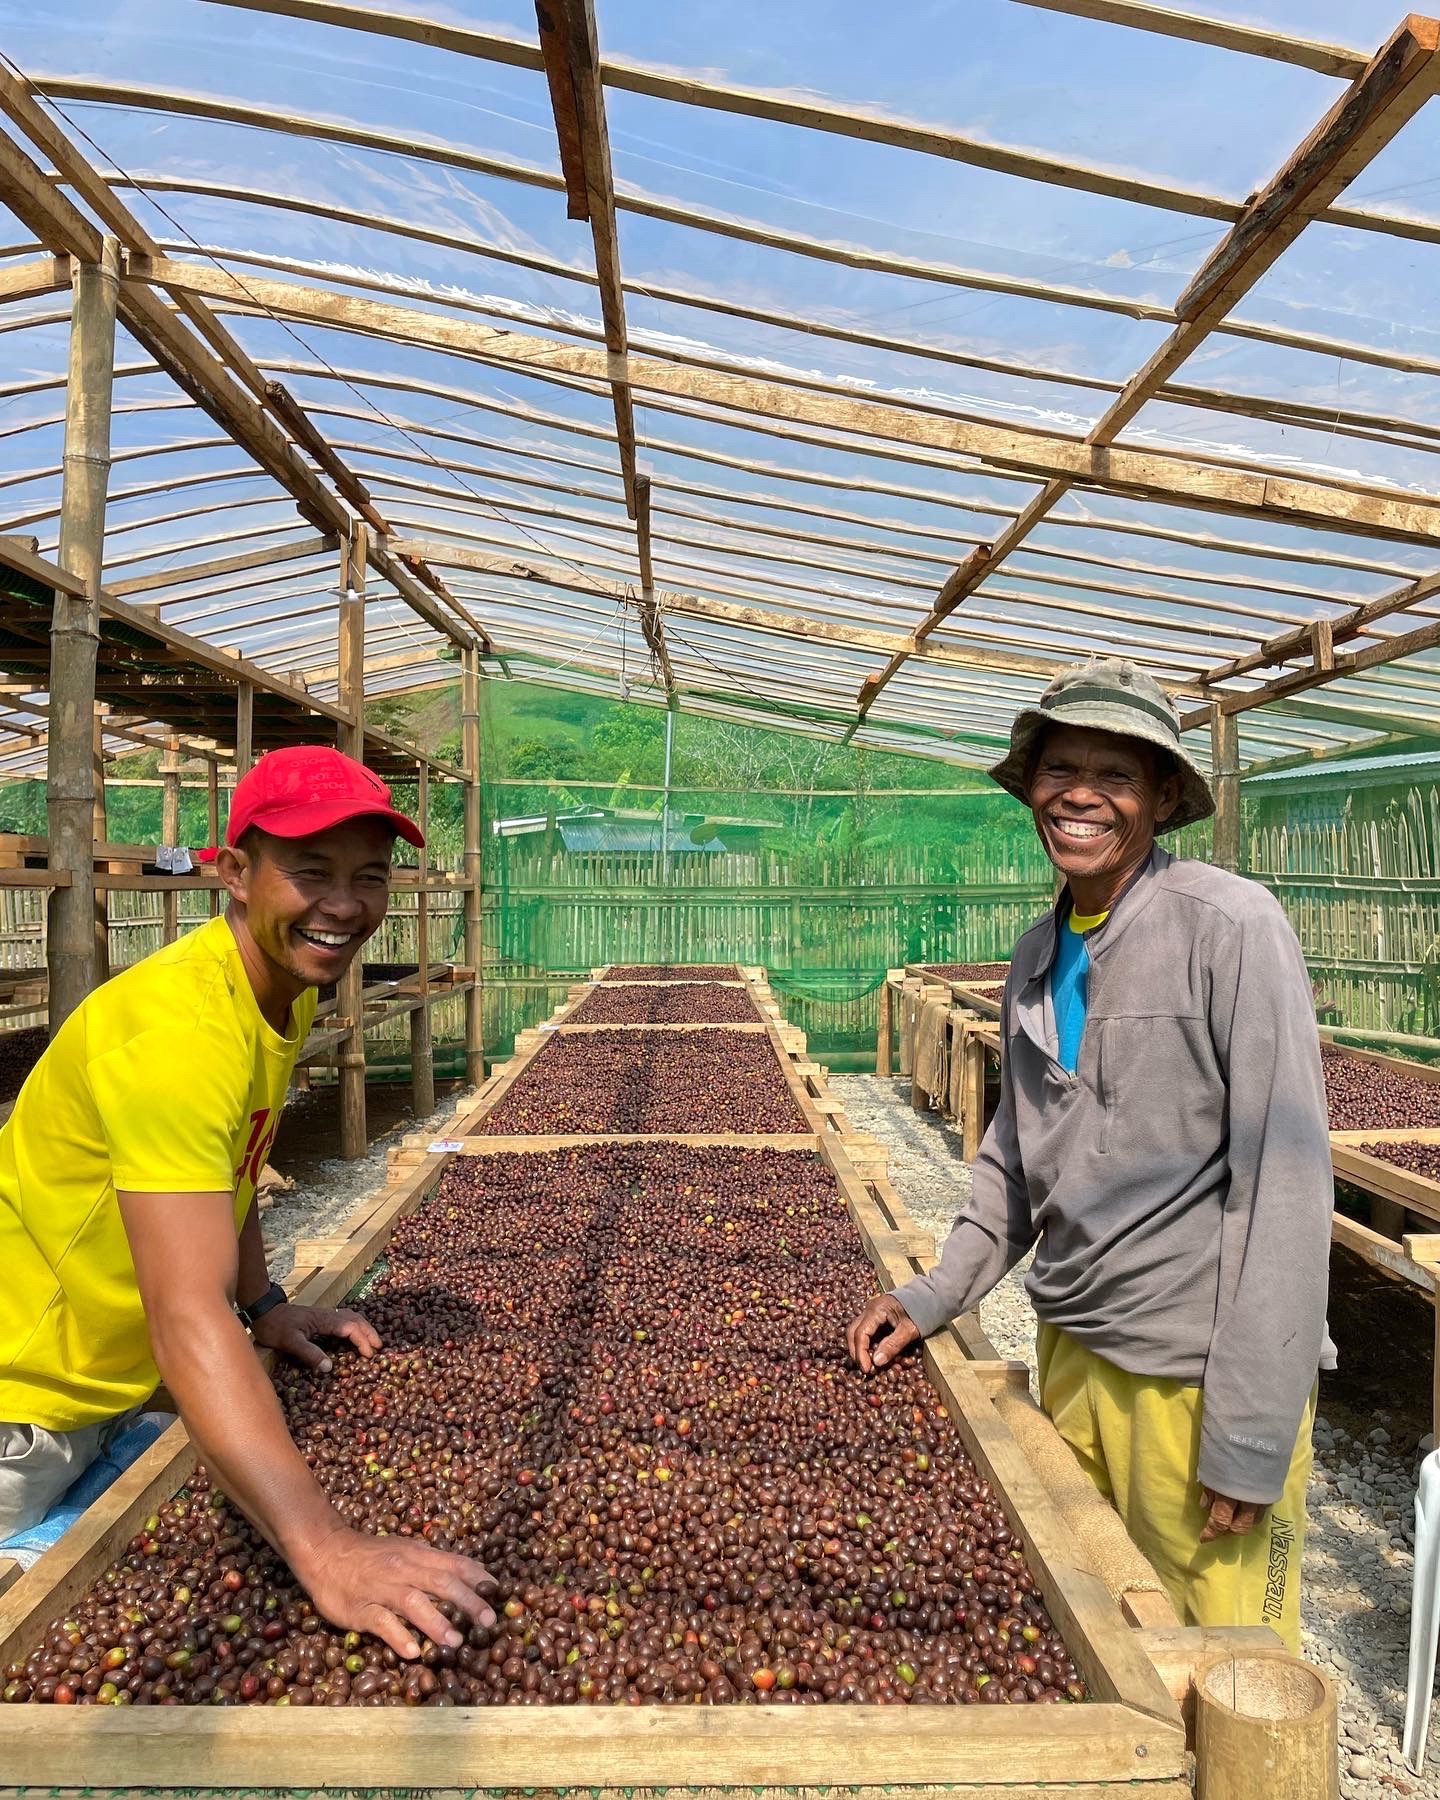 Farmers in Sitio San Roque share a laugh as they prepare the cherries for dry processing